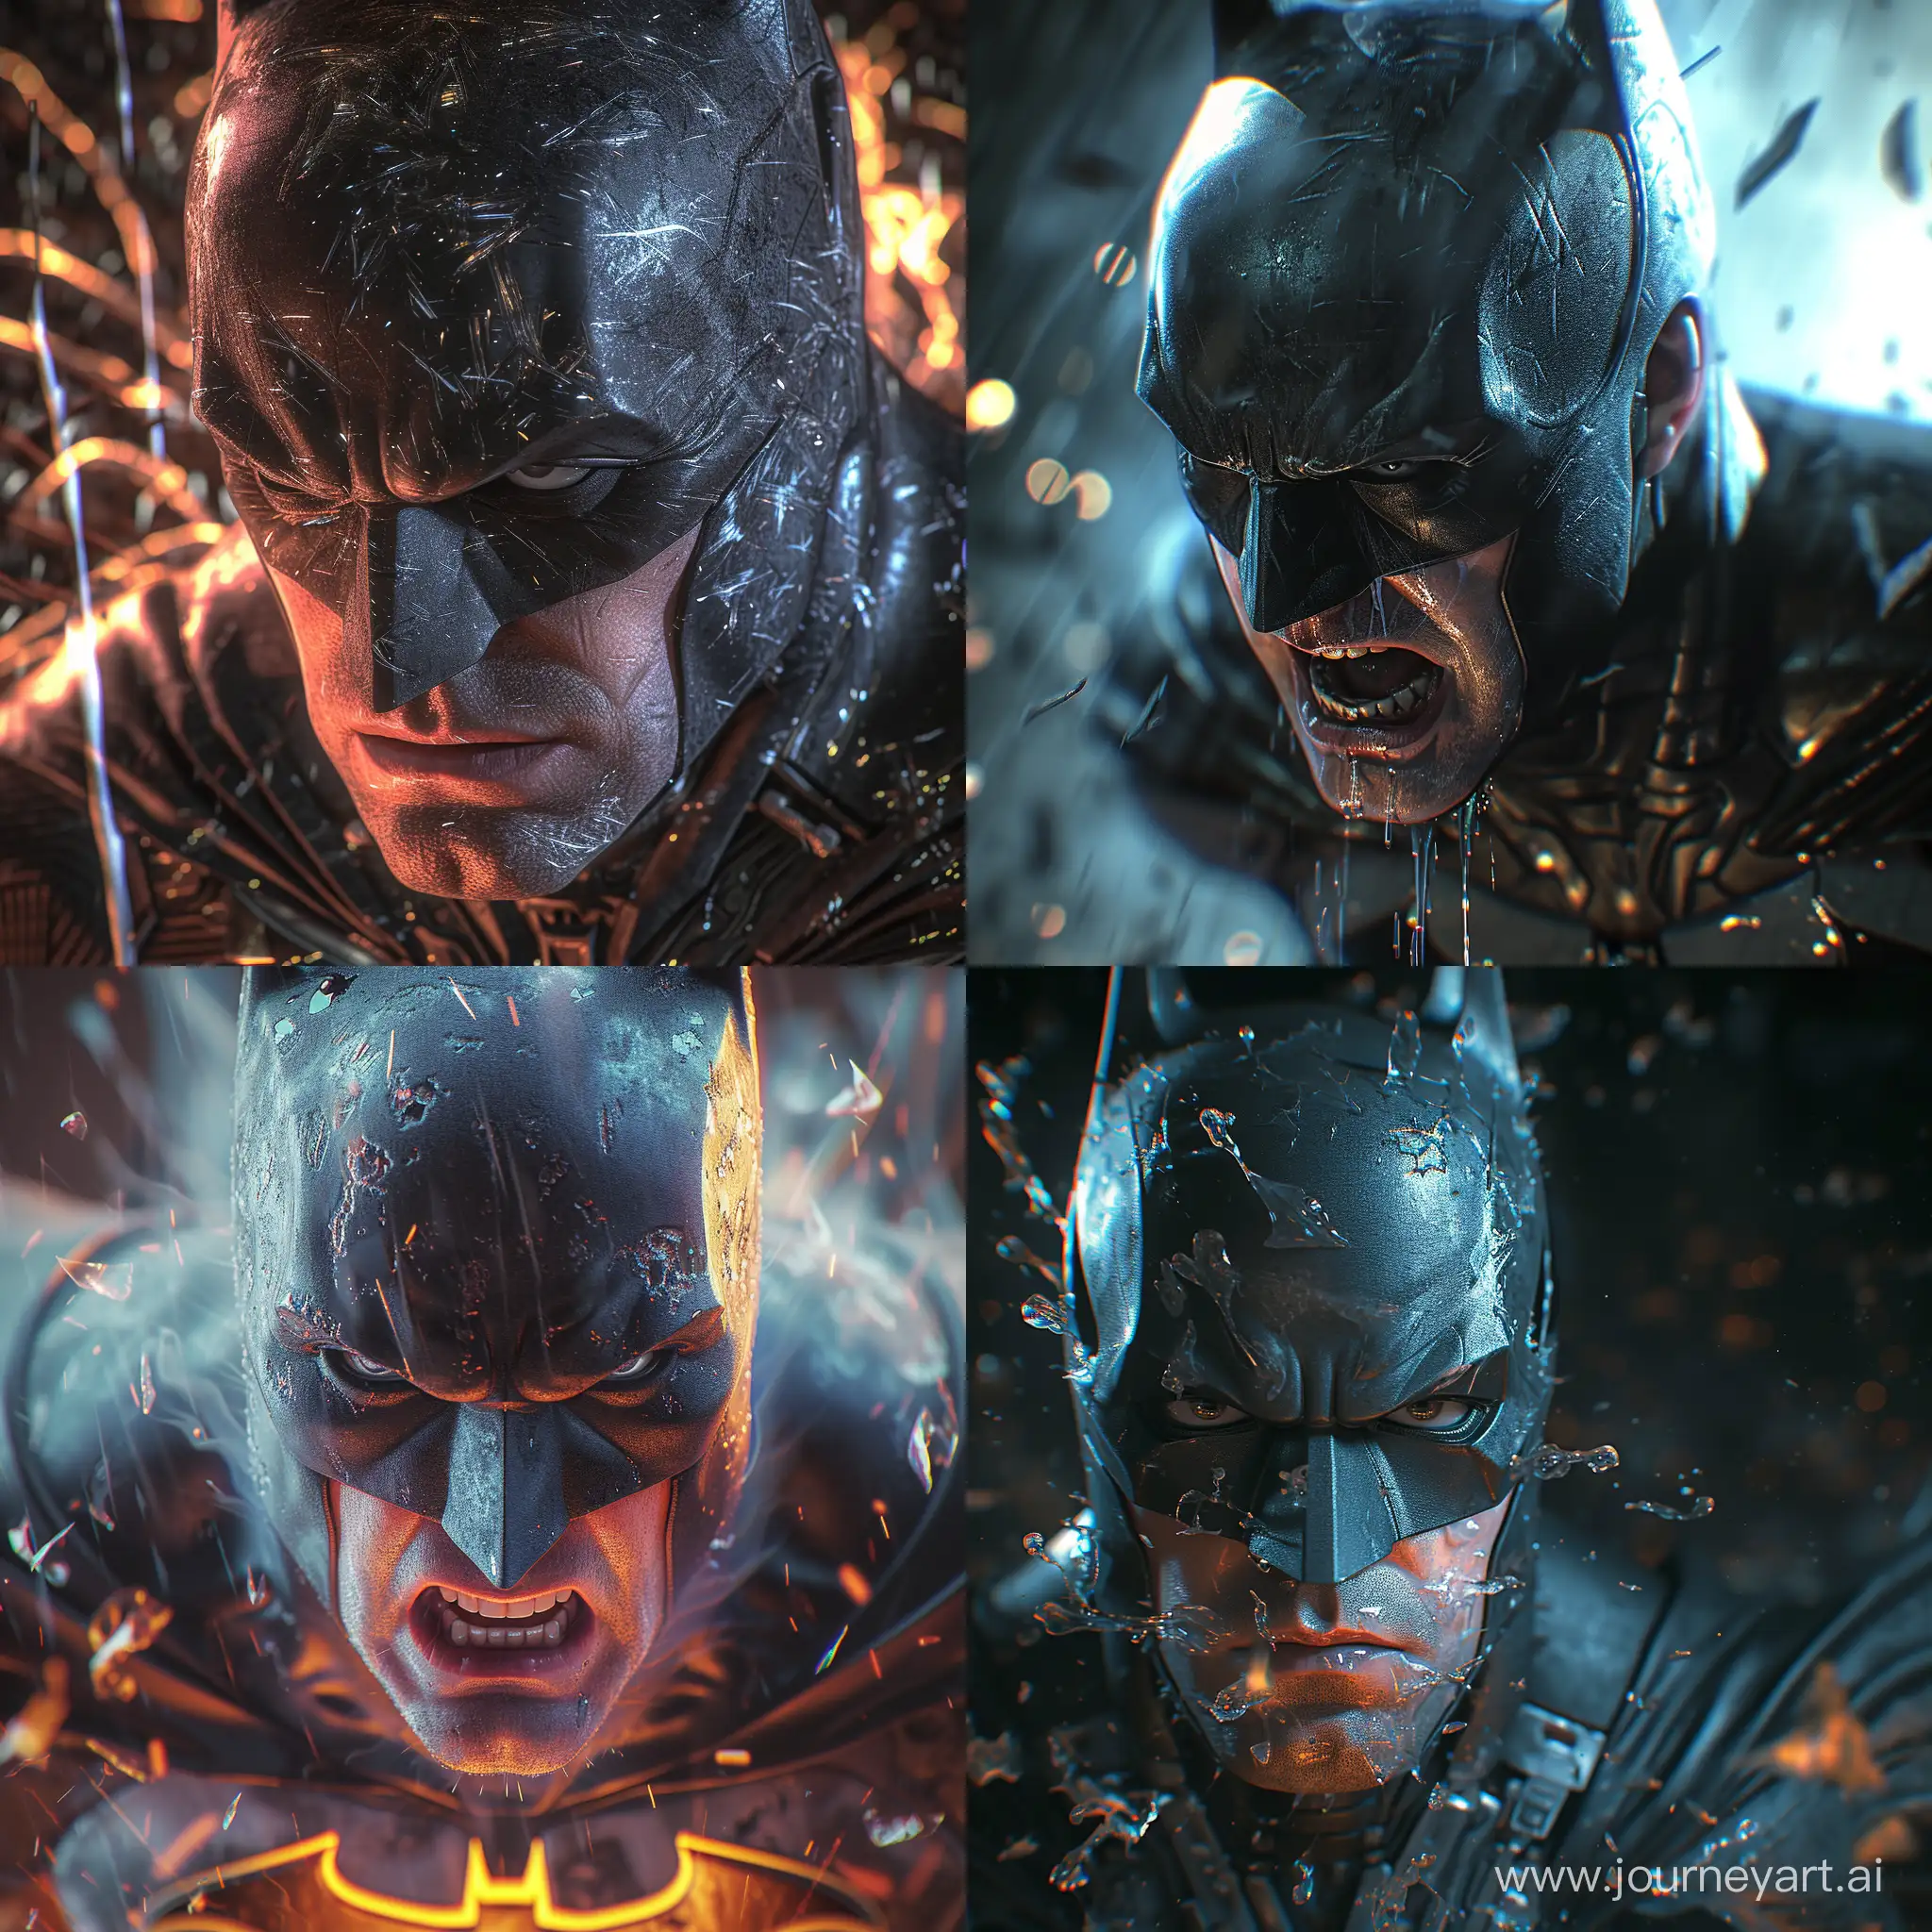 Epic-Batman-Wallpaper-HyperDetailed-Realism-with-Vivid-Energy-Explosions